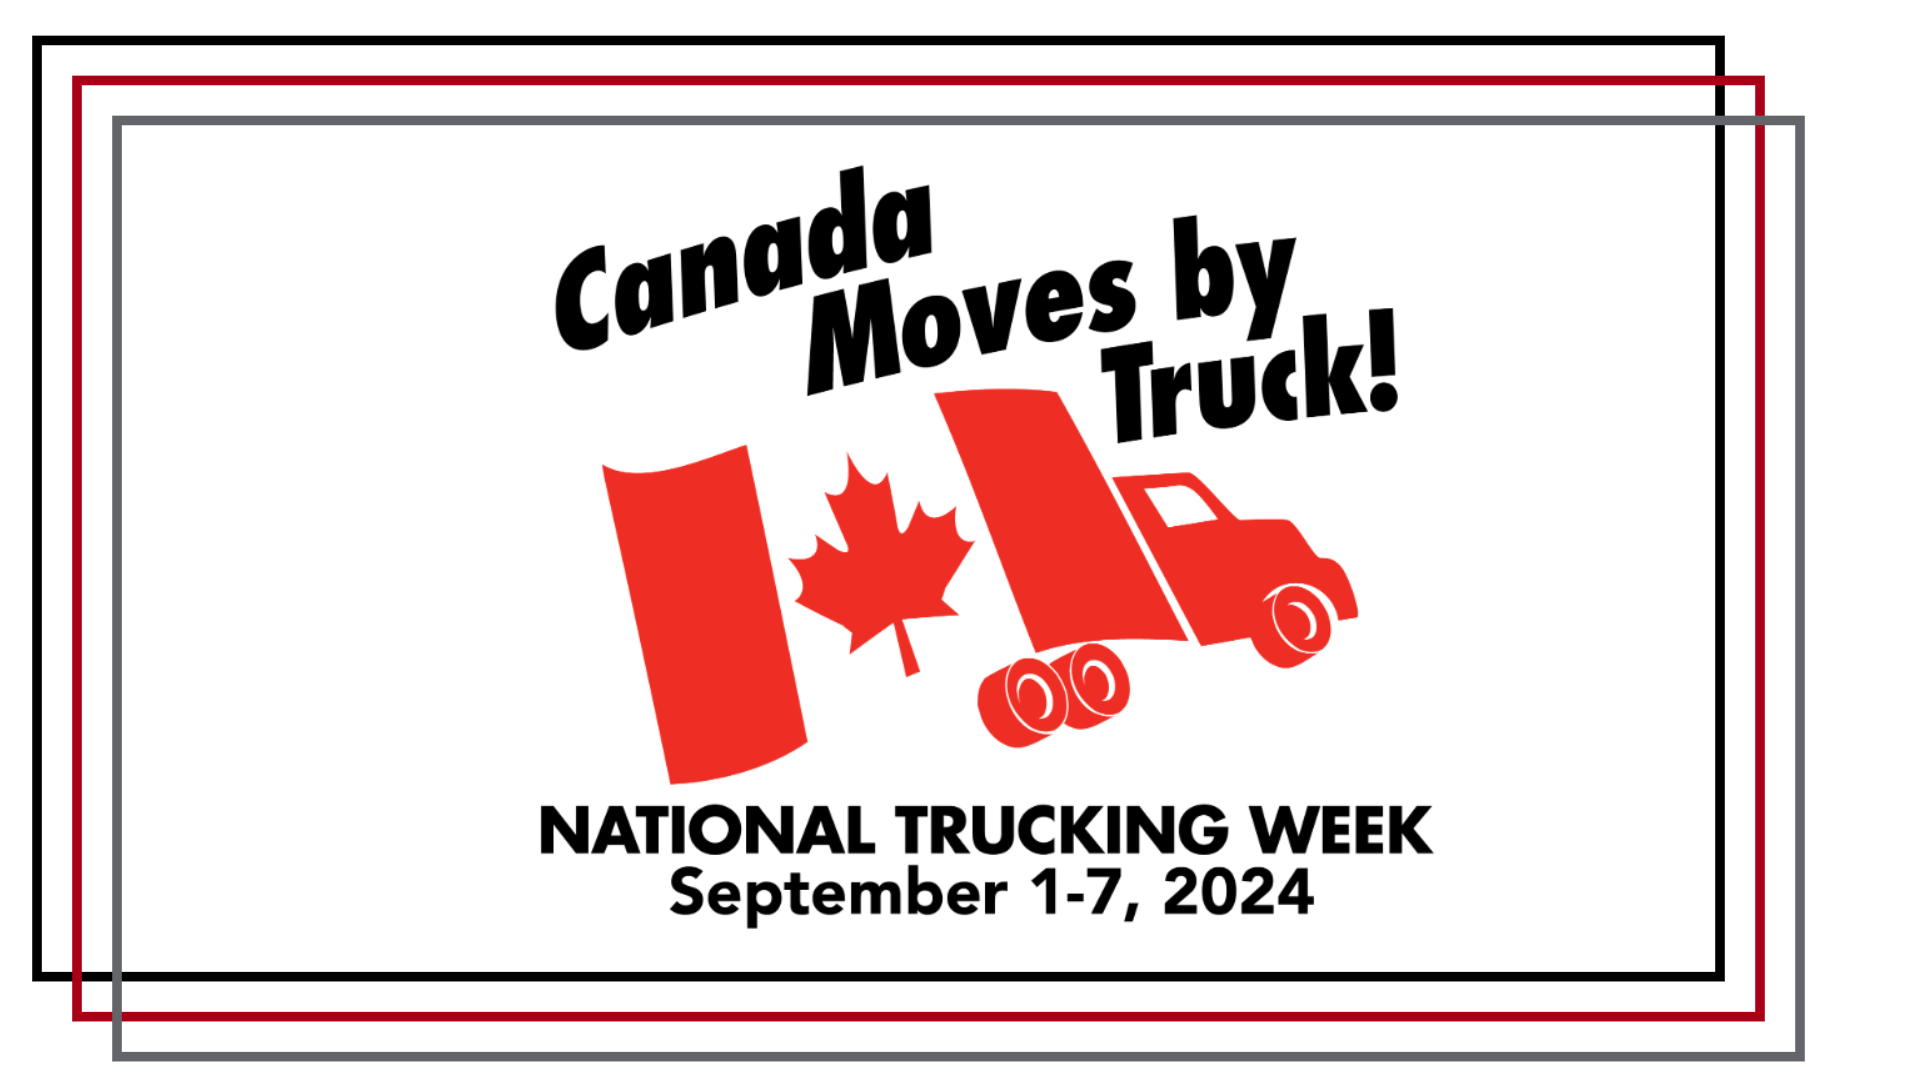 An image of a truck with the words "Canada Moves by Truck!" along the top, and "National Trucking Week, September 1-7, 2024" along the bottom.